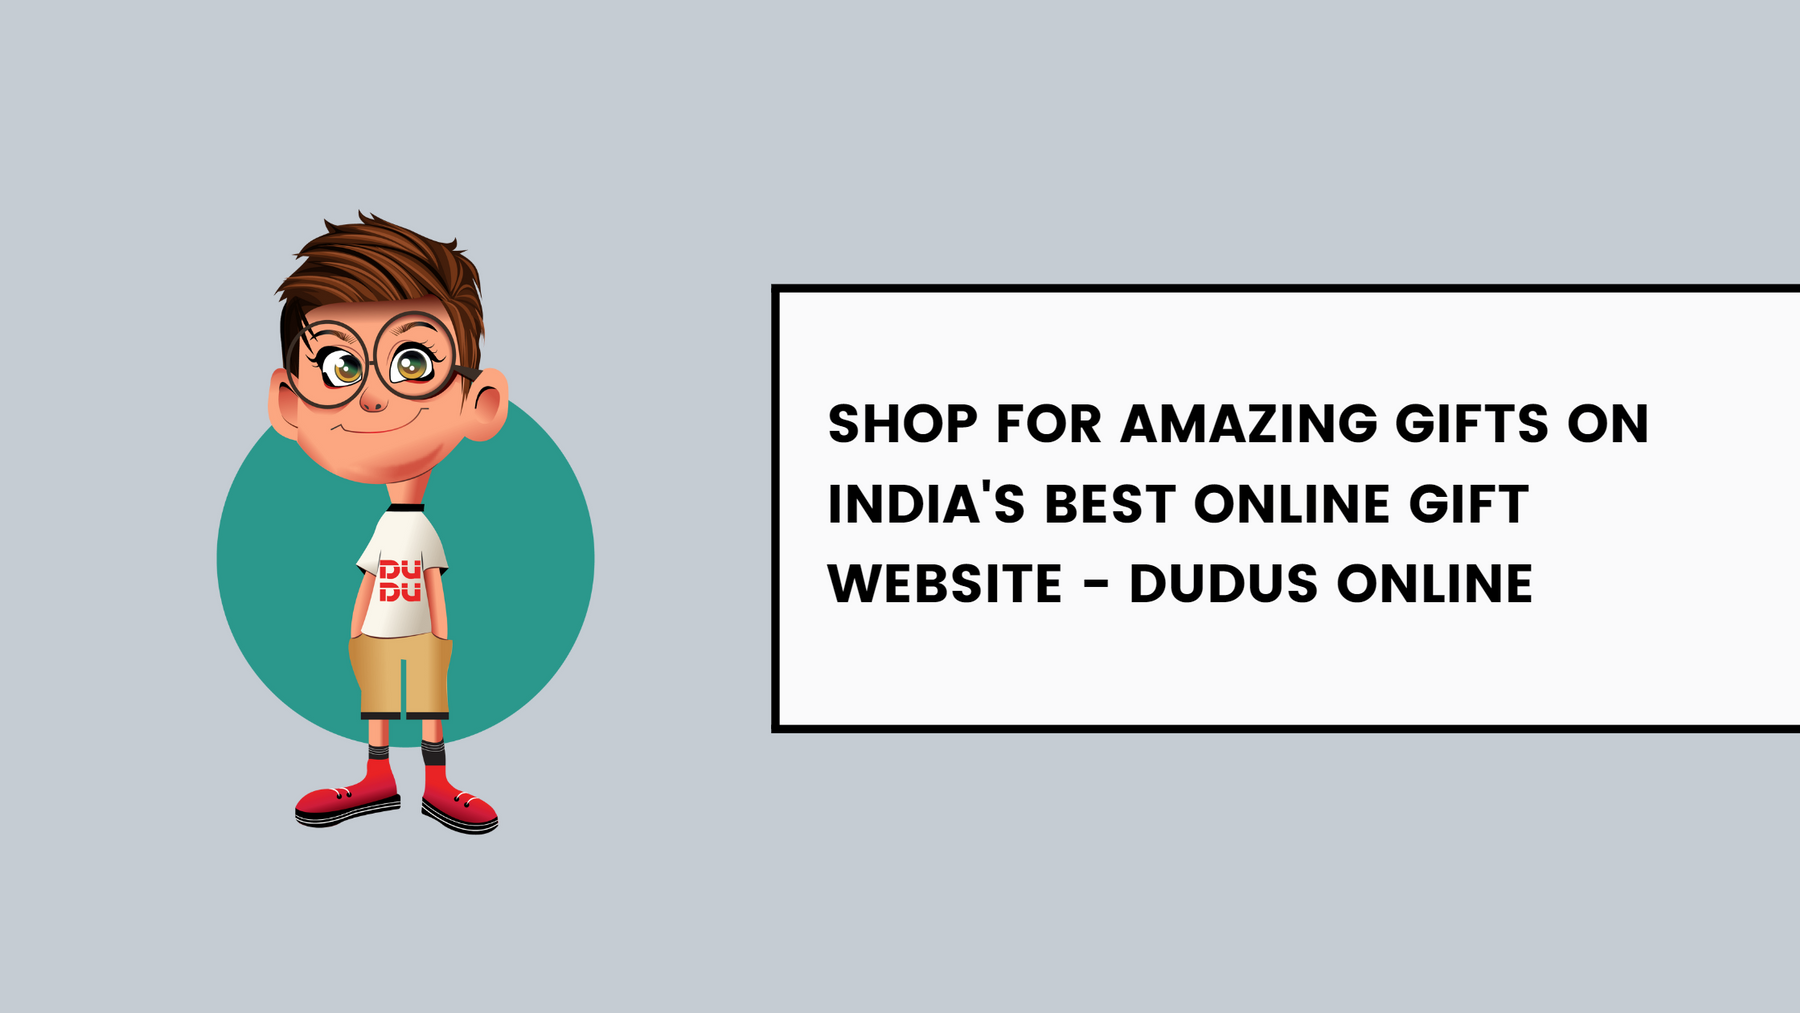 Shop For Amazing Gifts On India's Best Online Gift Website - Dudus Online